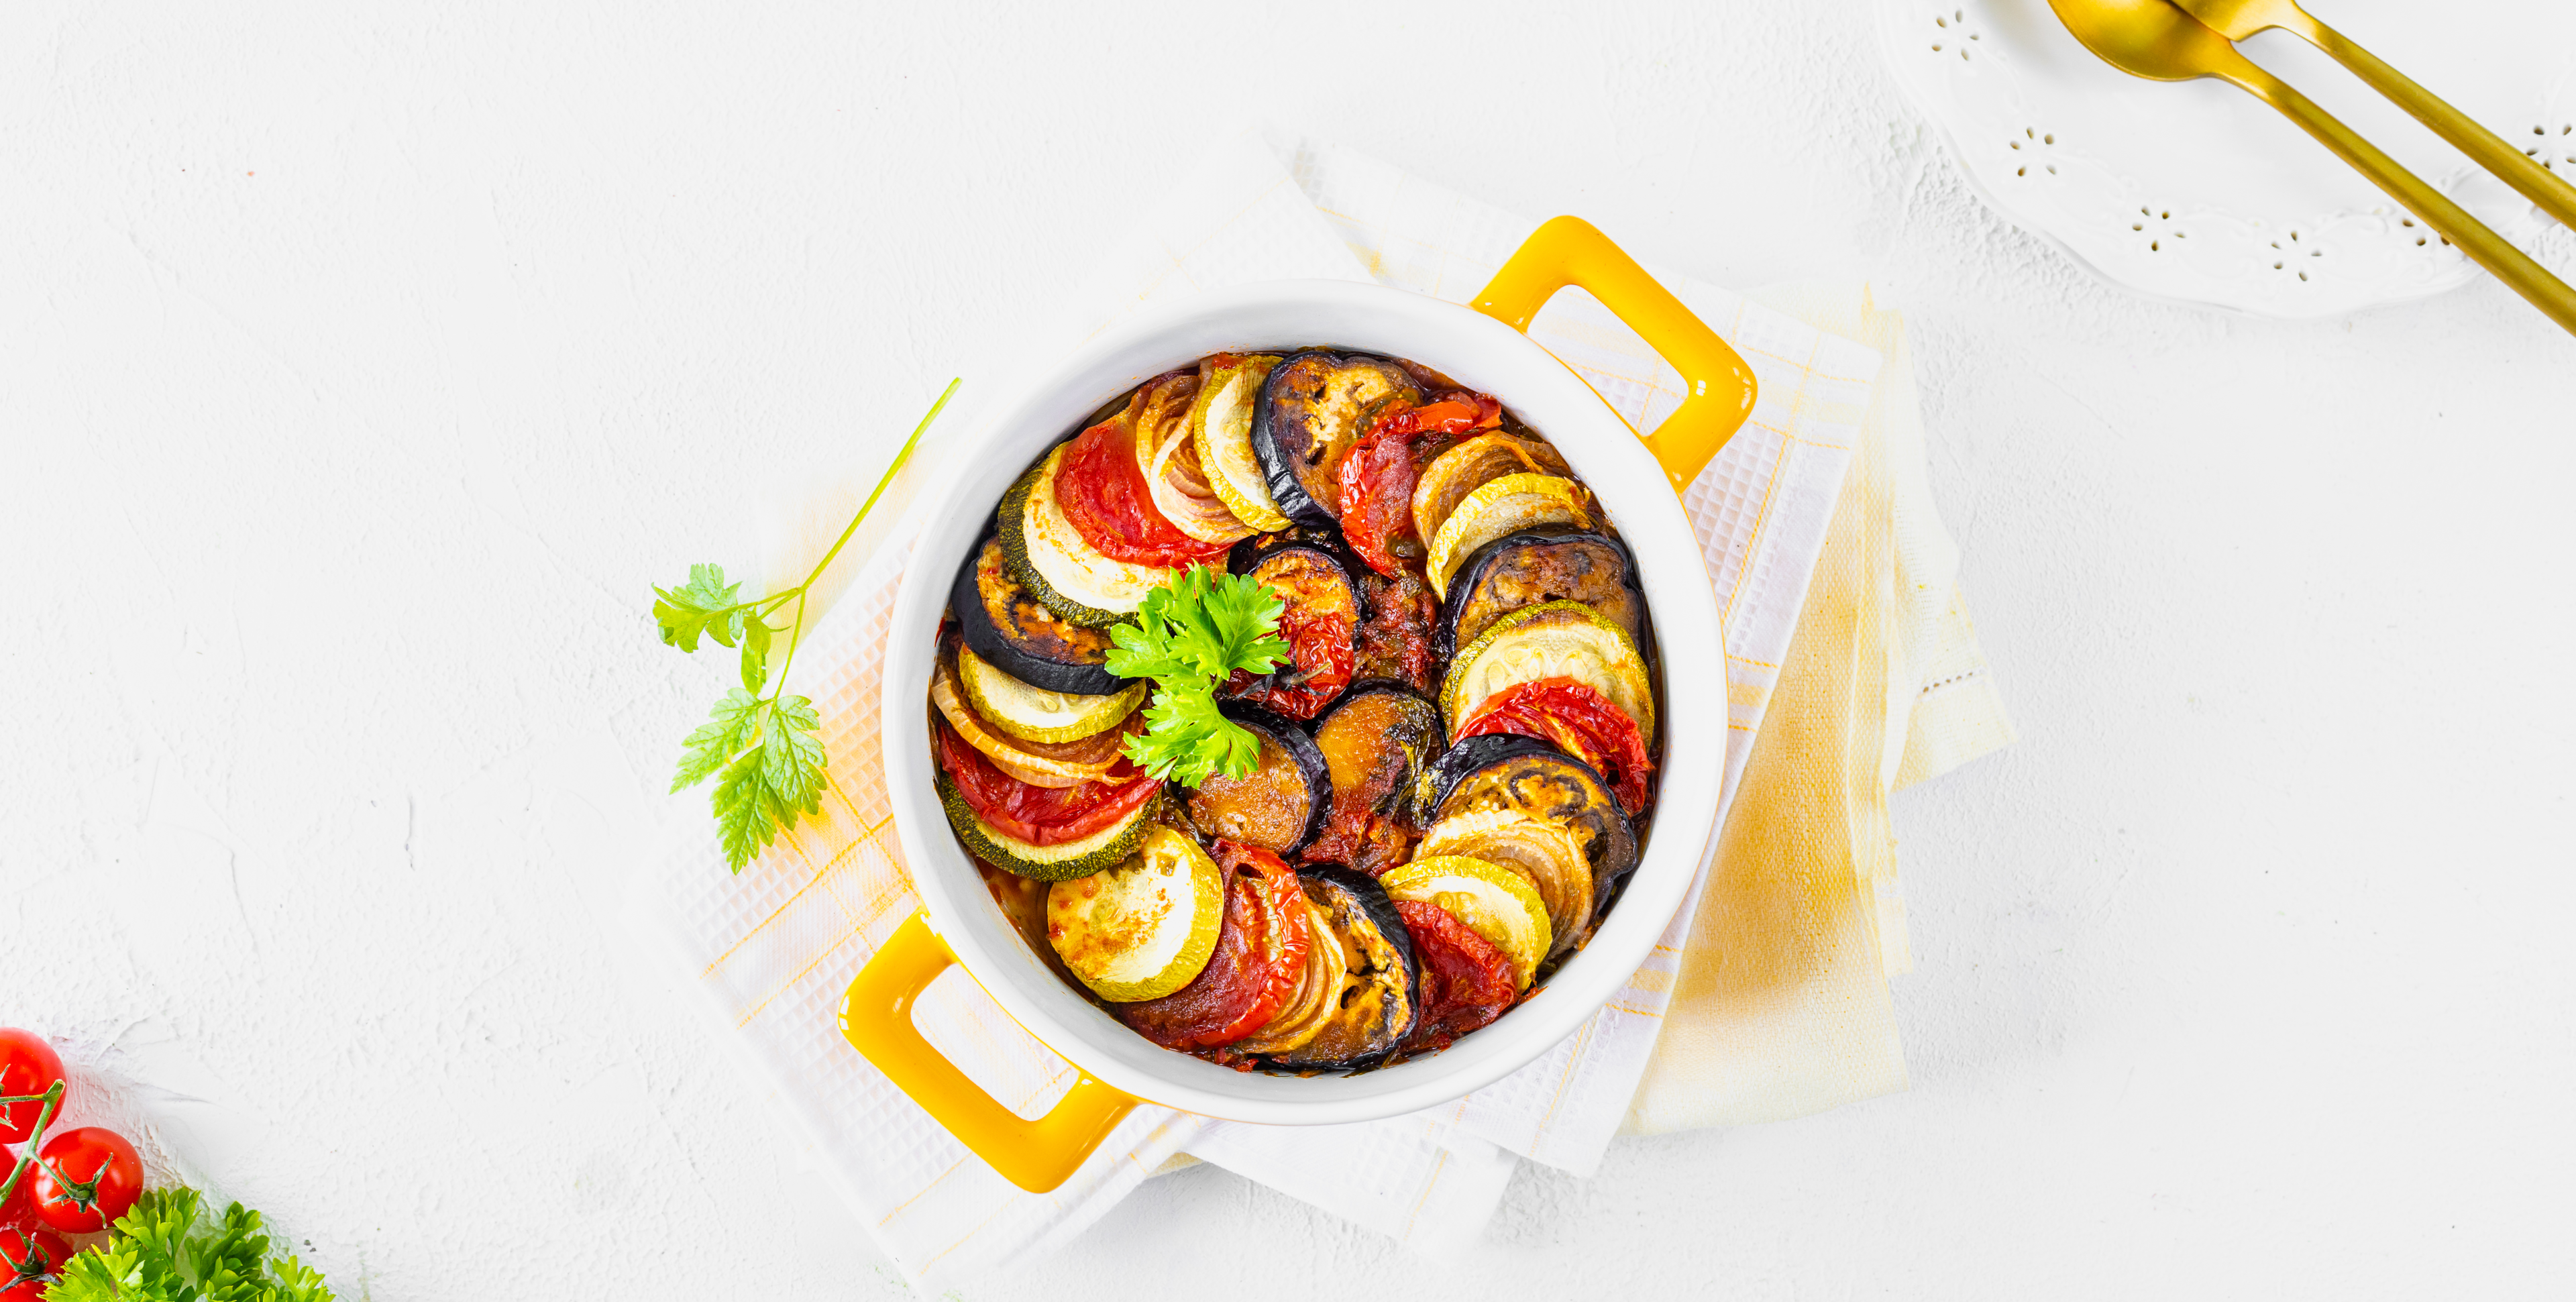 Golden roast potatoes, honey-glazed carrots and a colourful ratatouille are just a few perfect accompaniments to roast lamb.